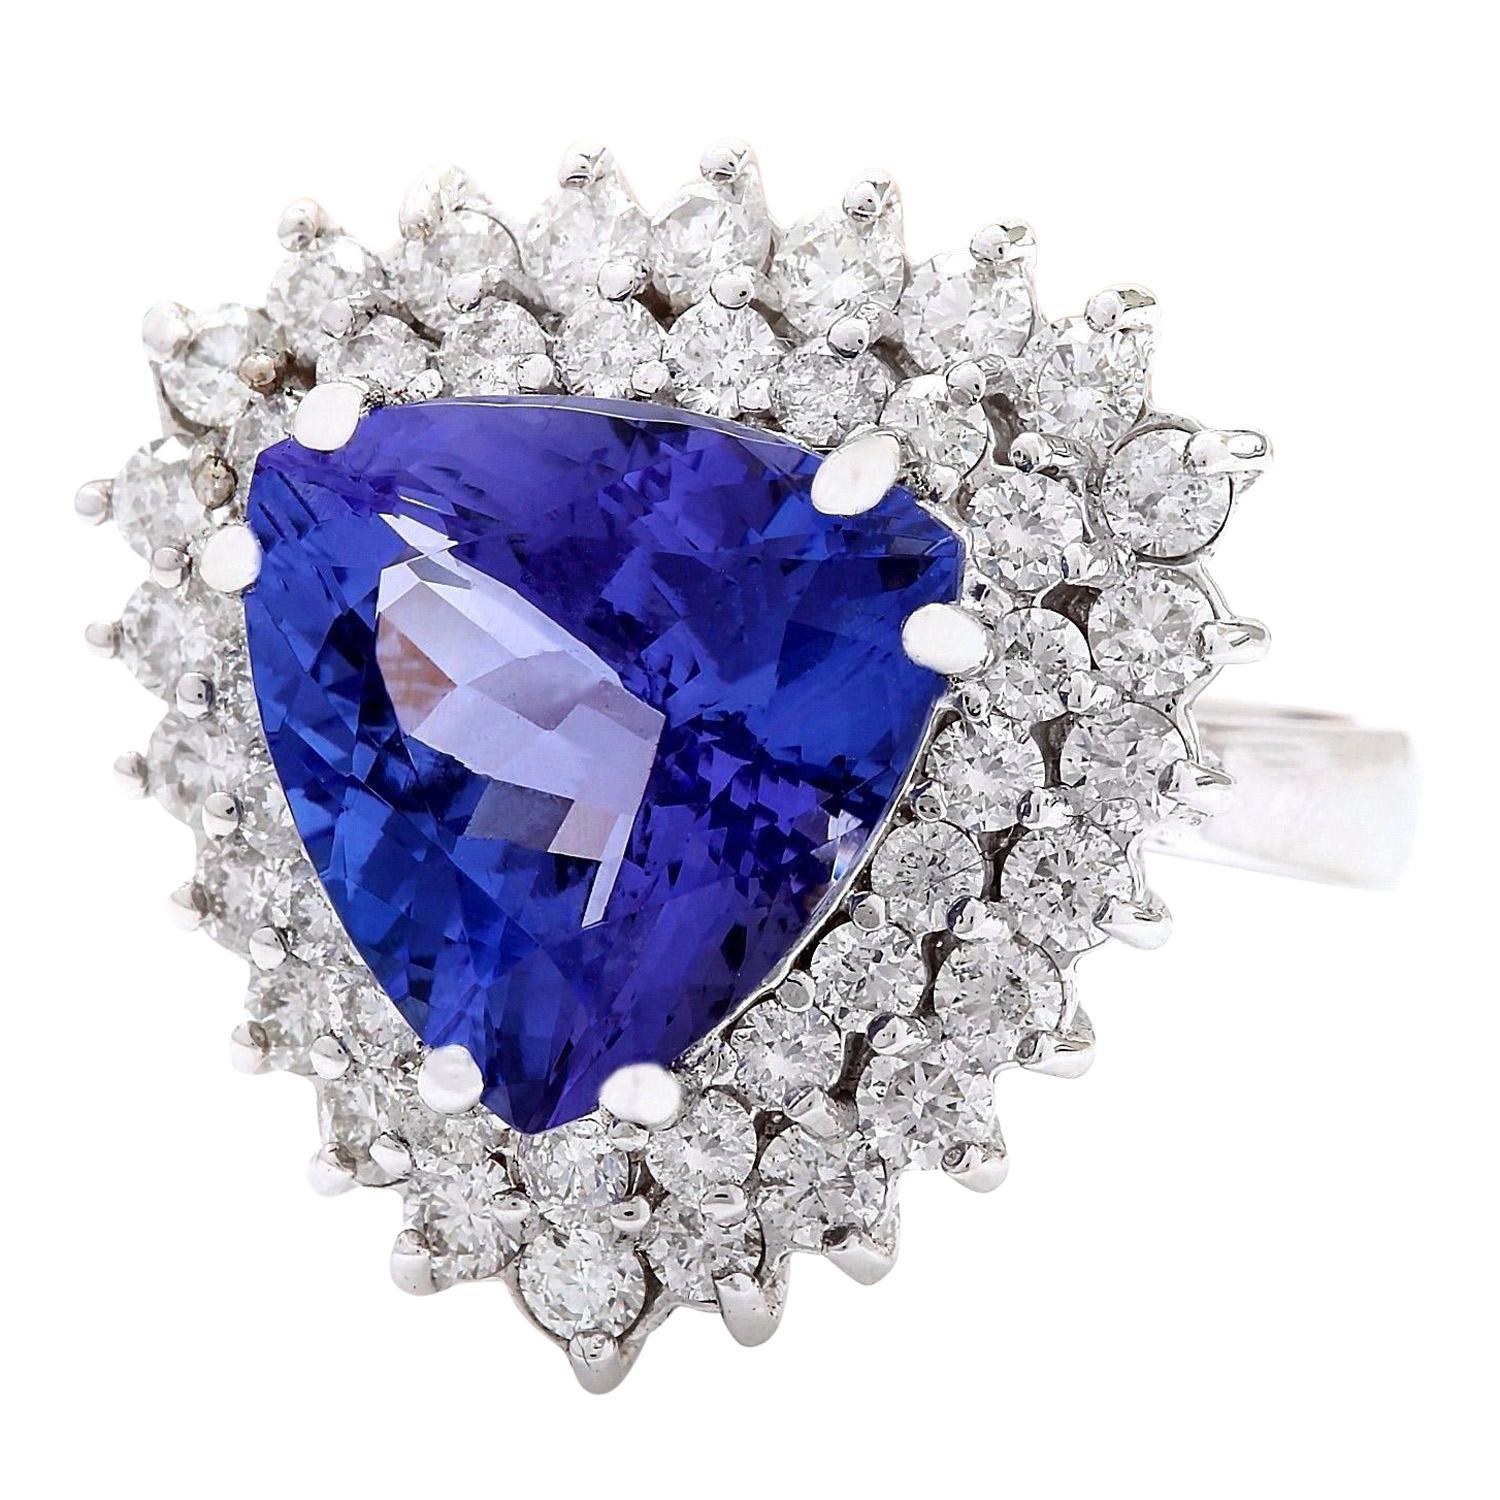 8.23 Carat  Tanzanite 18K Solid White Gold Diamond Ring
Item Type: Ring
Item Style: Cocktail
Material: 18K White Gold
Mainstone: Tanzanite
Stone Color: Blue
Stone Weight: 6.23 Carat
Stone Shape: Trillion
Stone Quantity: 1
Stone Dimensions: